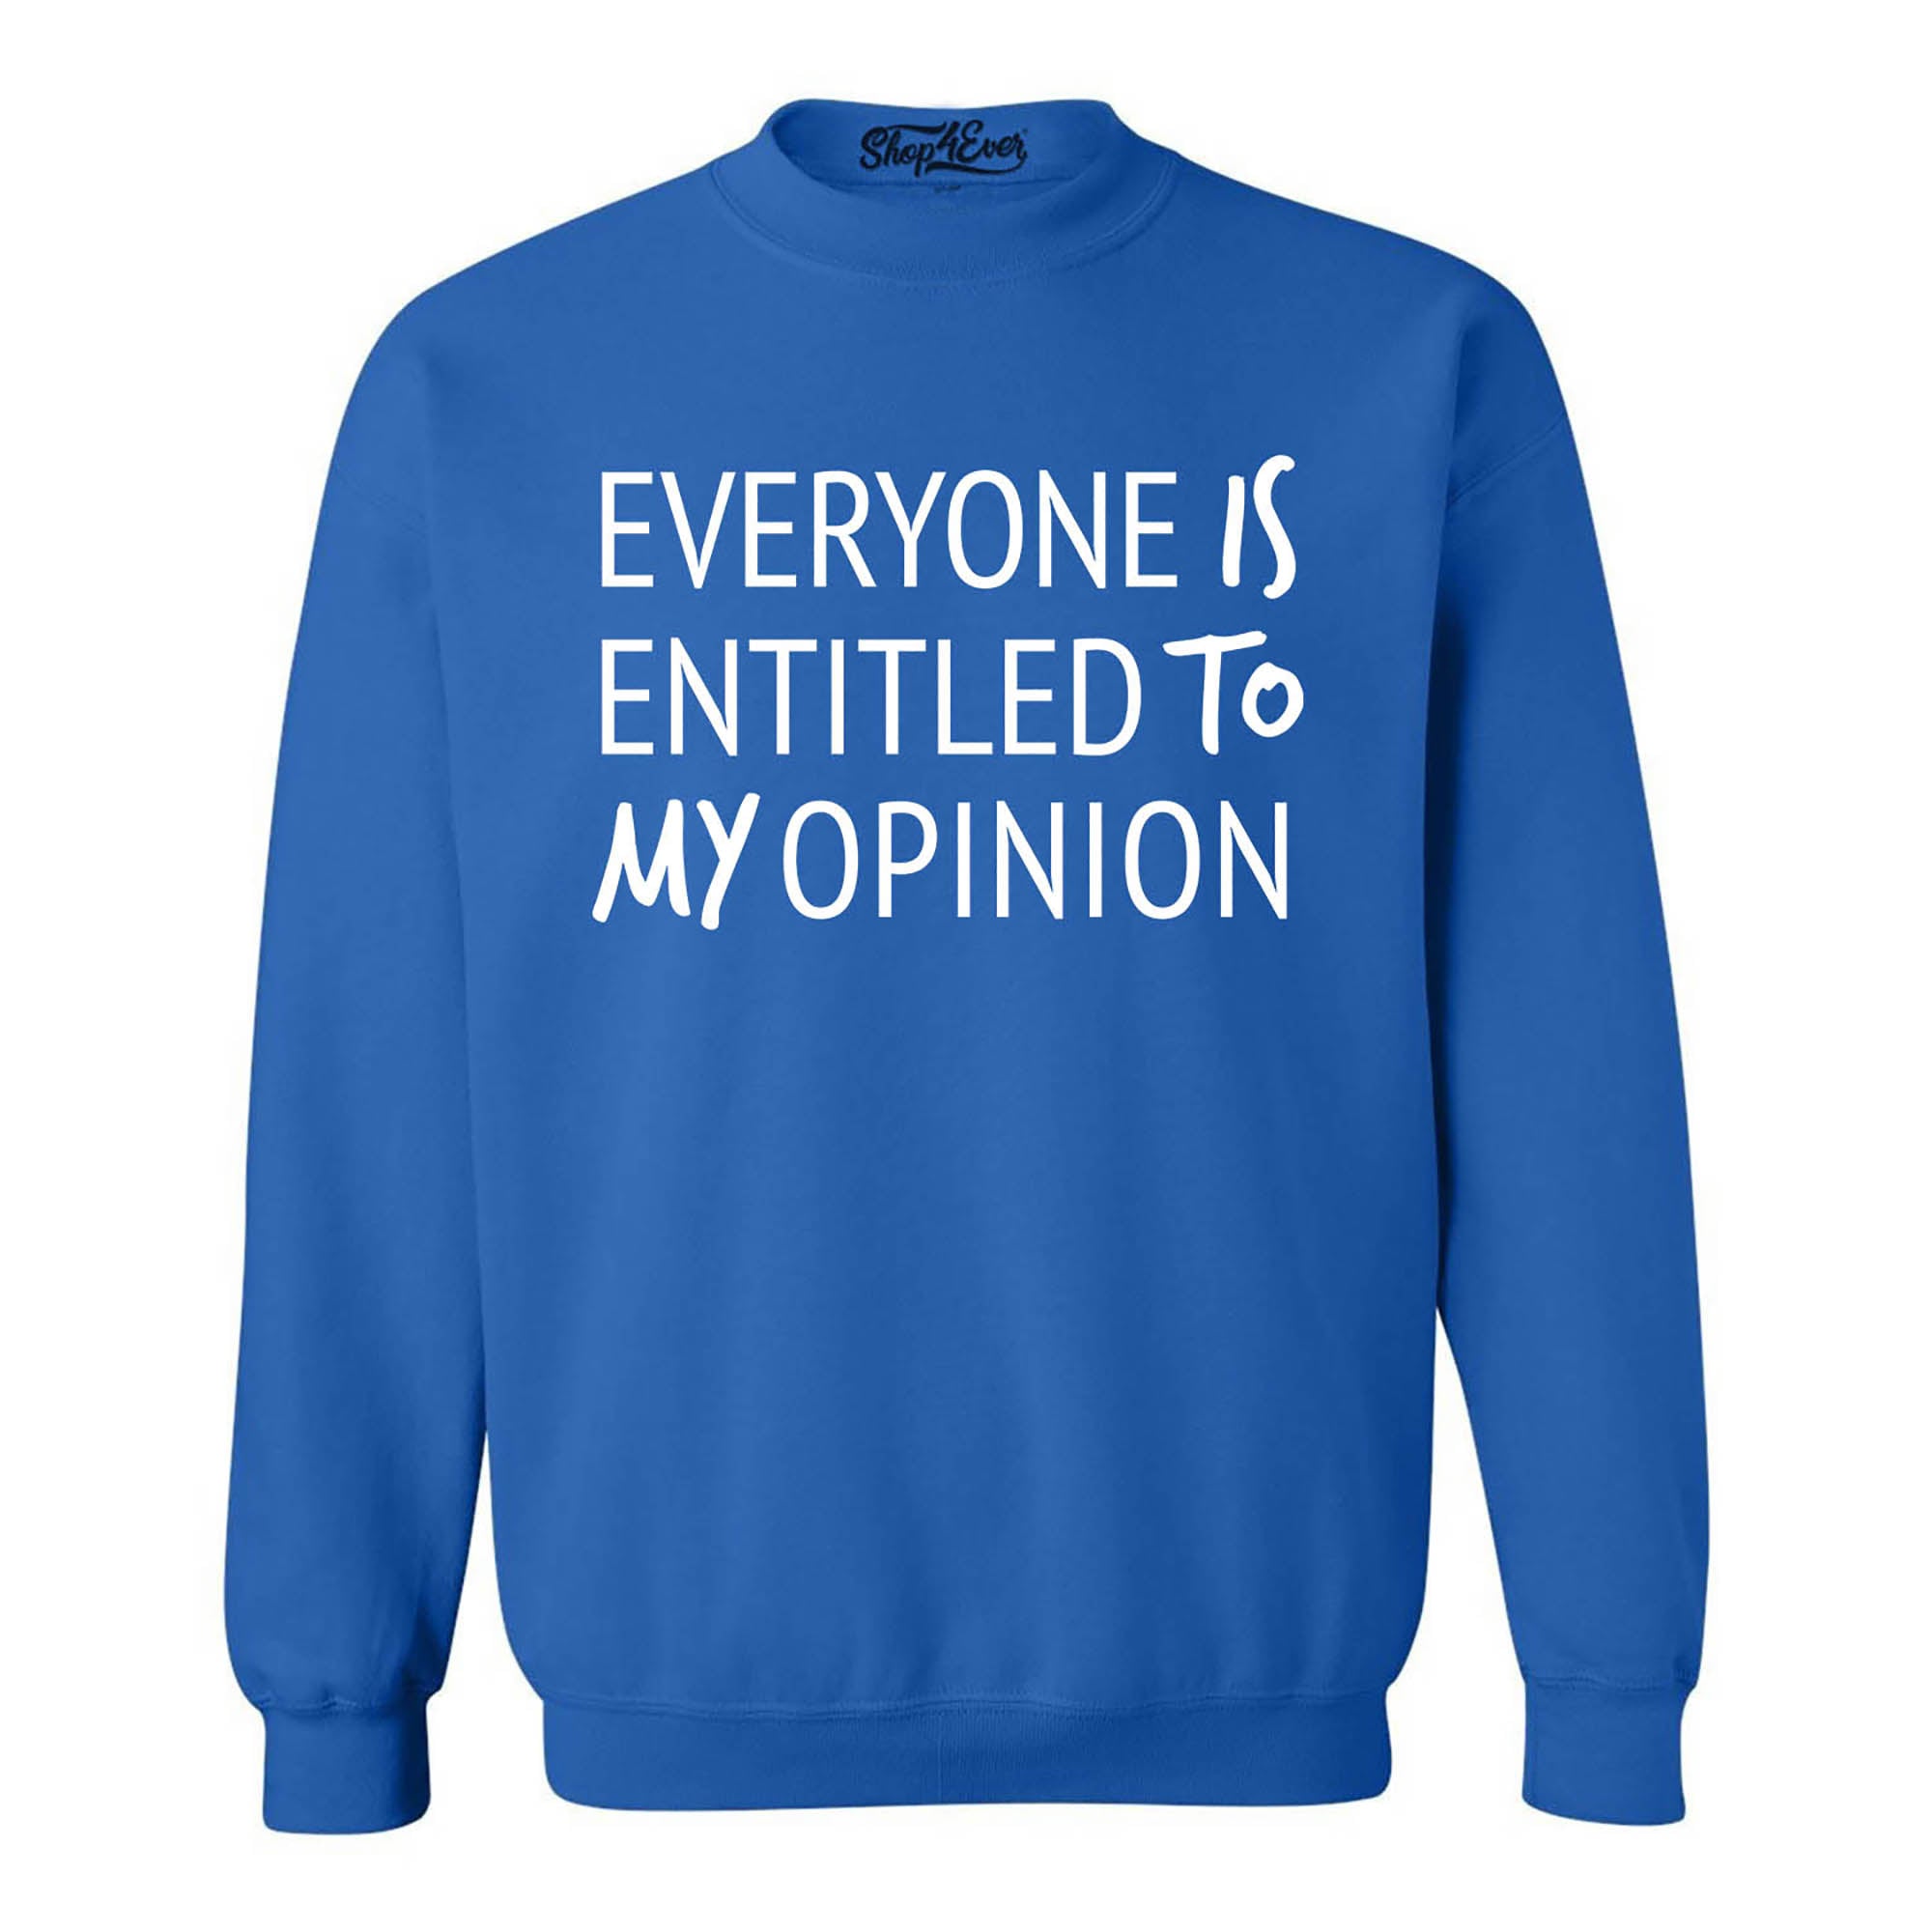 Everyone is Entitled to My Opinion Funny Sarcastic Crewneck Sweatshirts